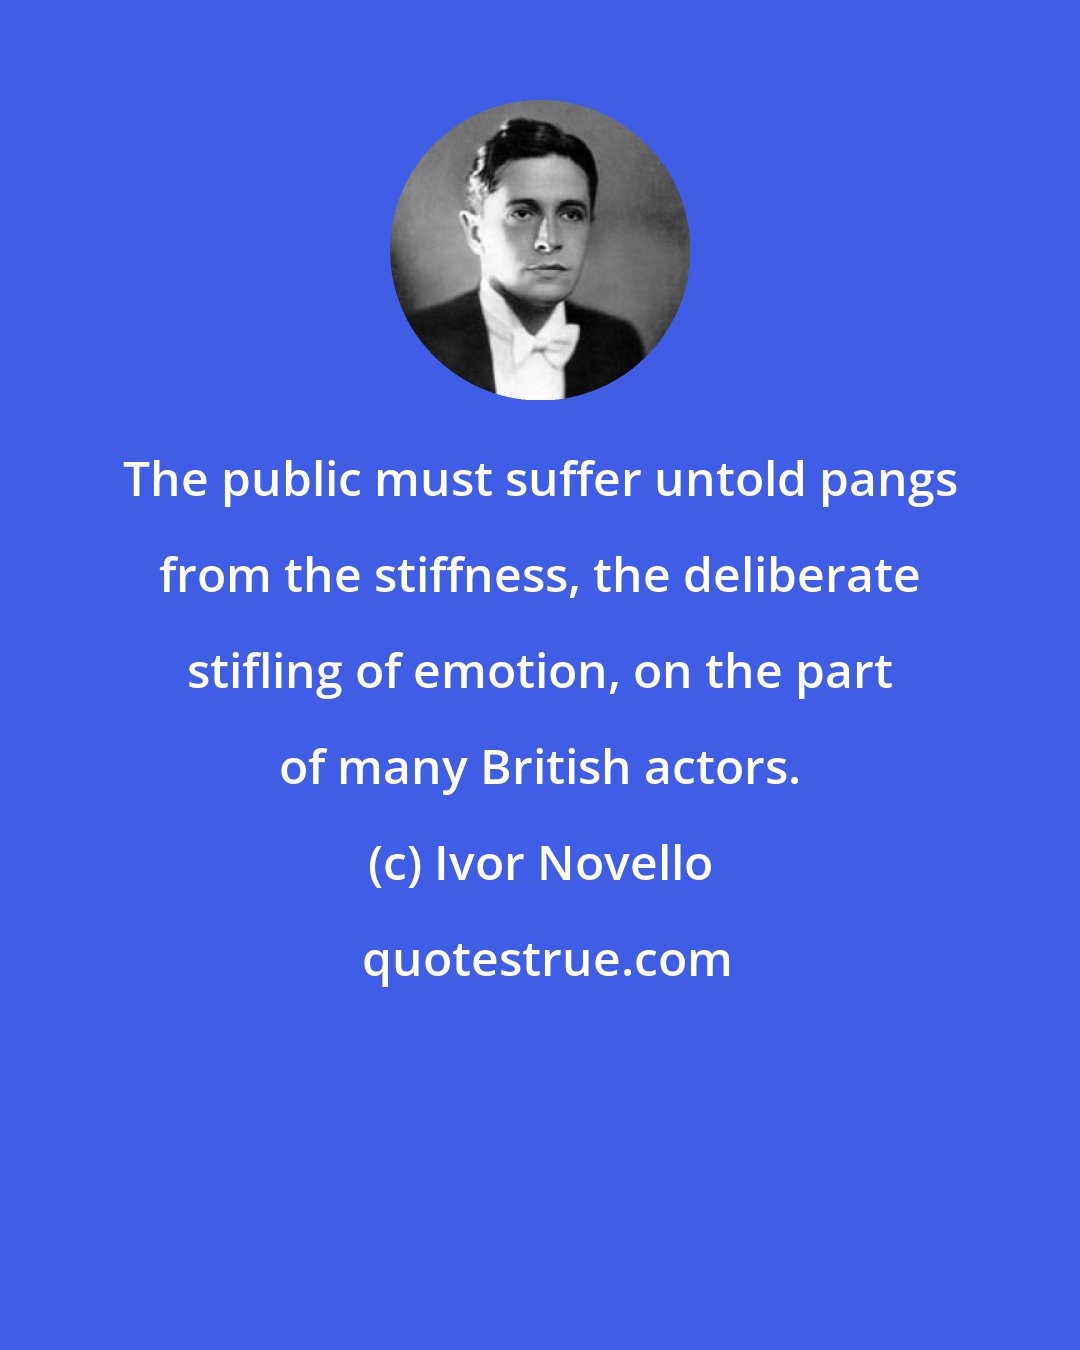 Ivor Novello: The public must suffer untold pangs from the stiffness, the deliberate stifling of emotion, on the part of many British actors.